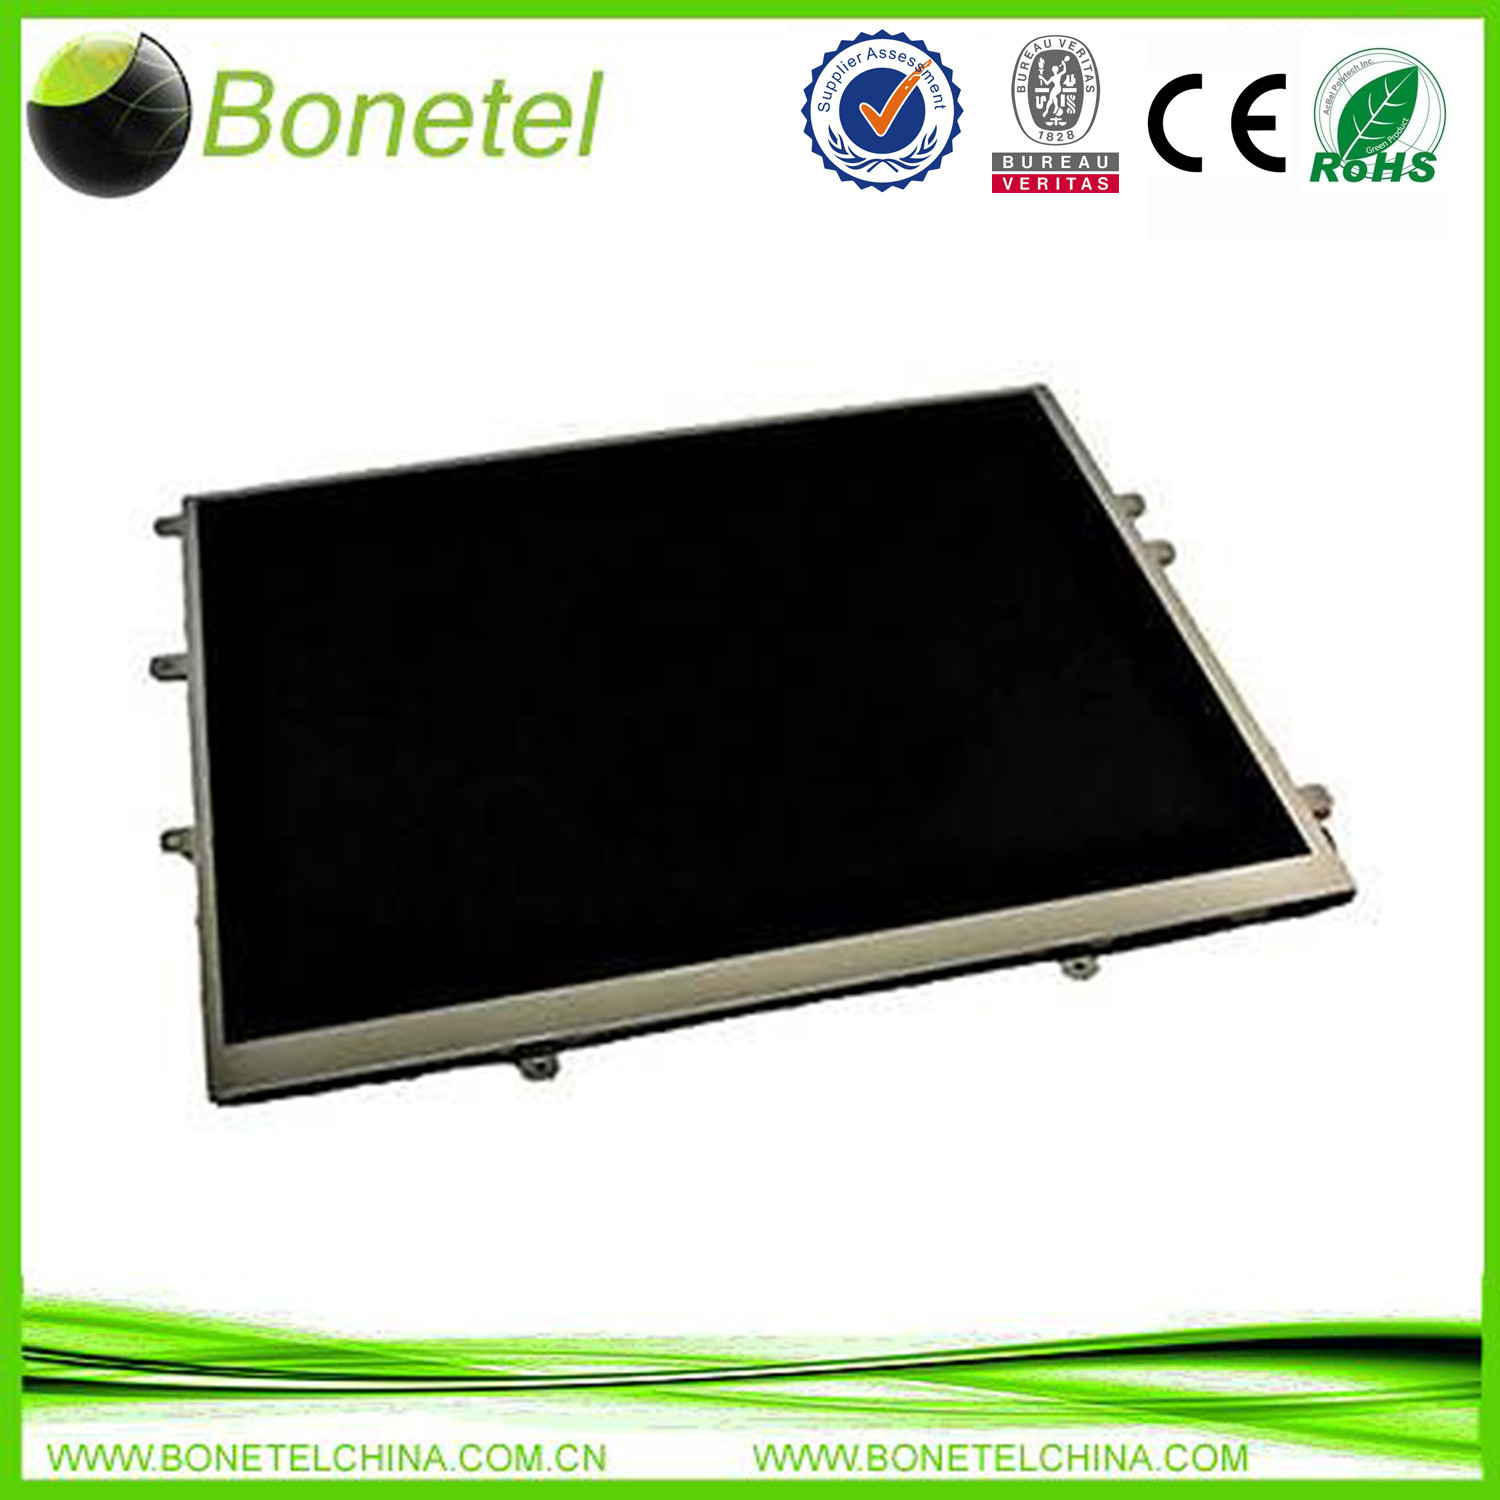 NEW LCD Display Screen Replacement Part 9.7 inches for Apple iPad 1st Gen